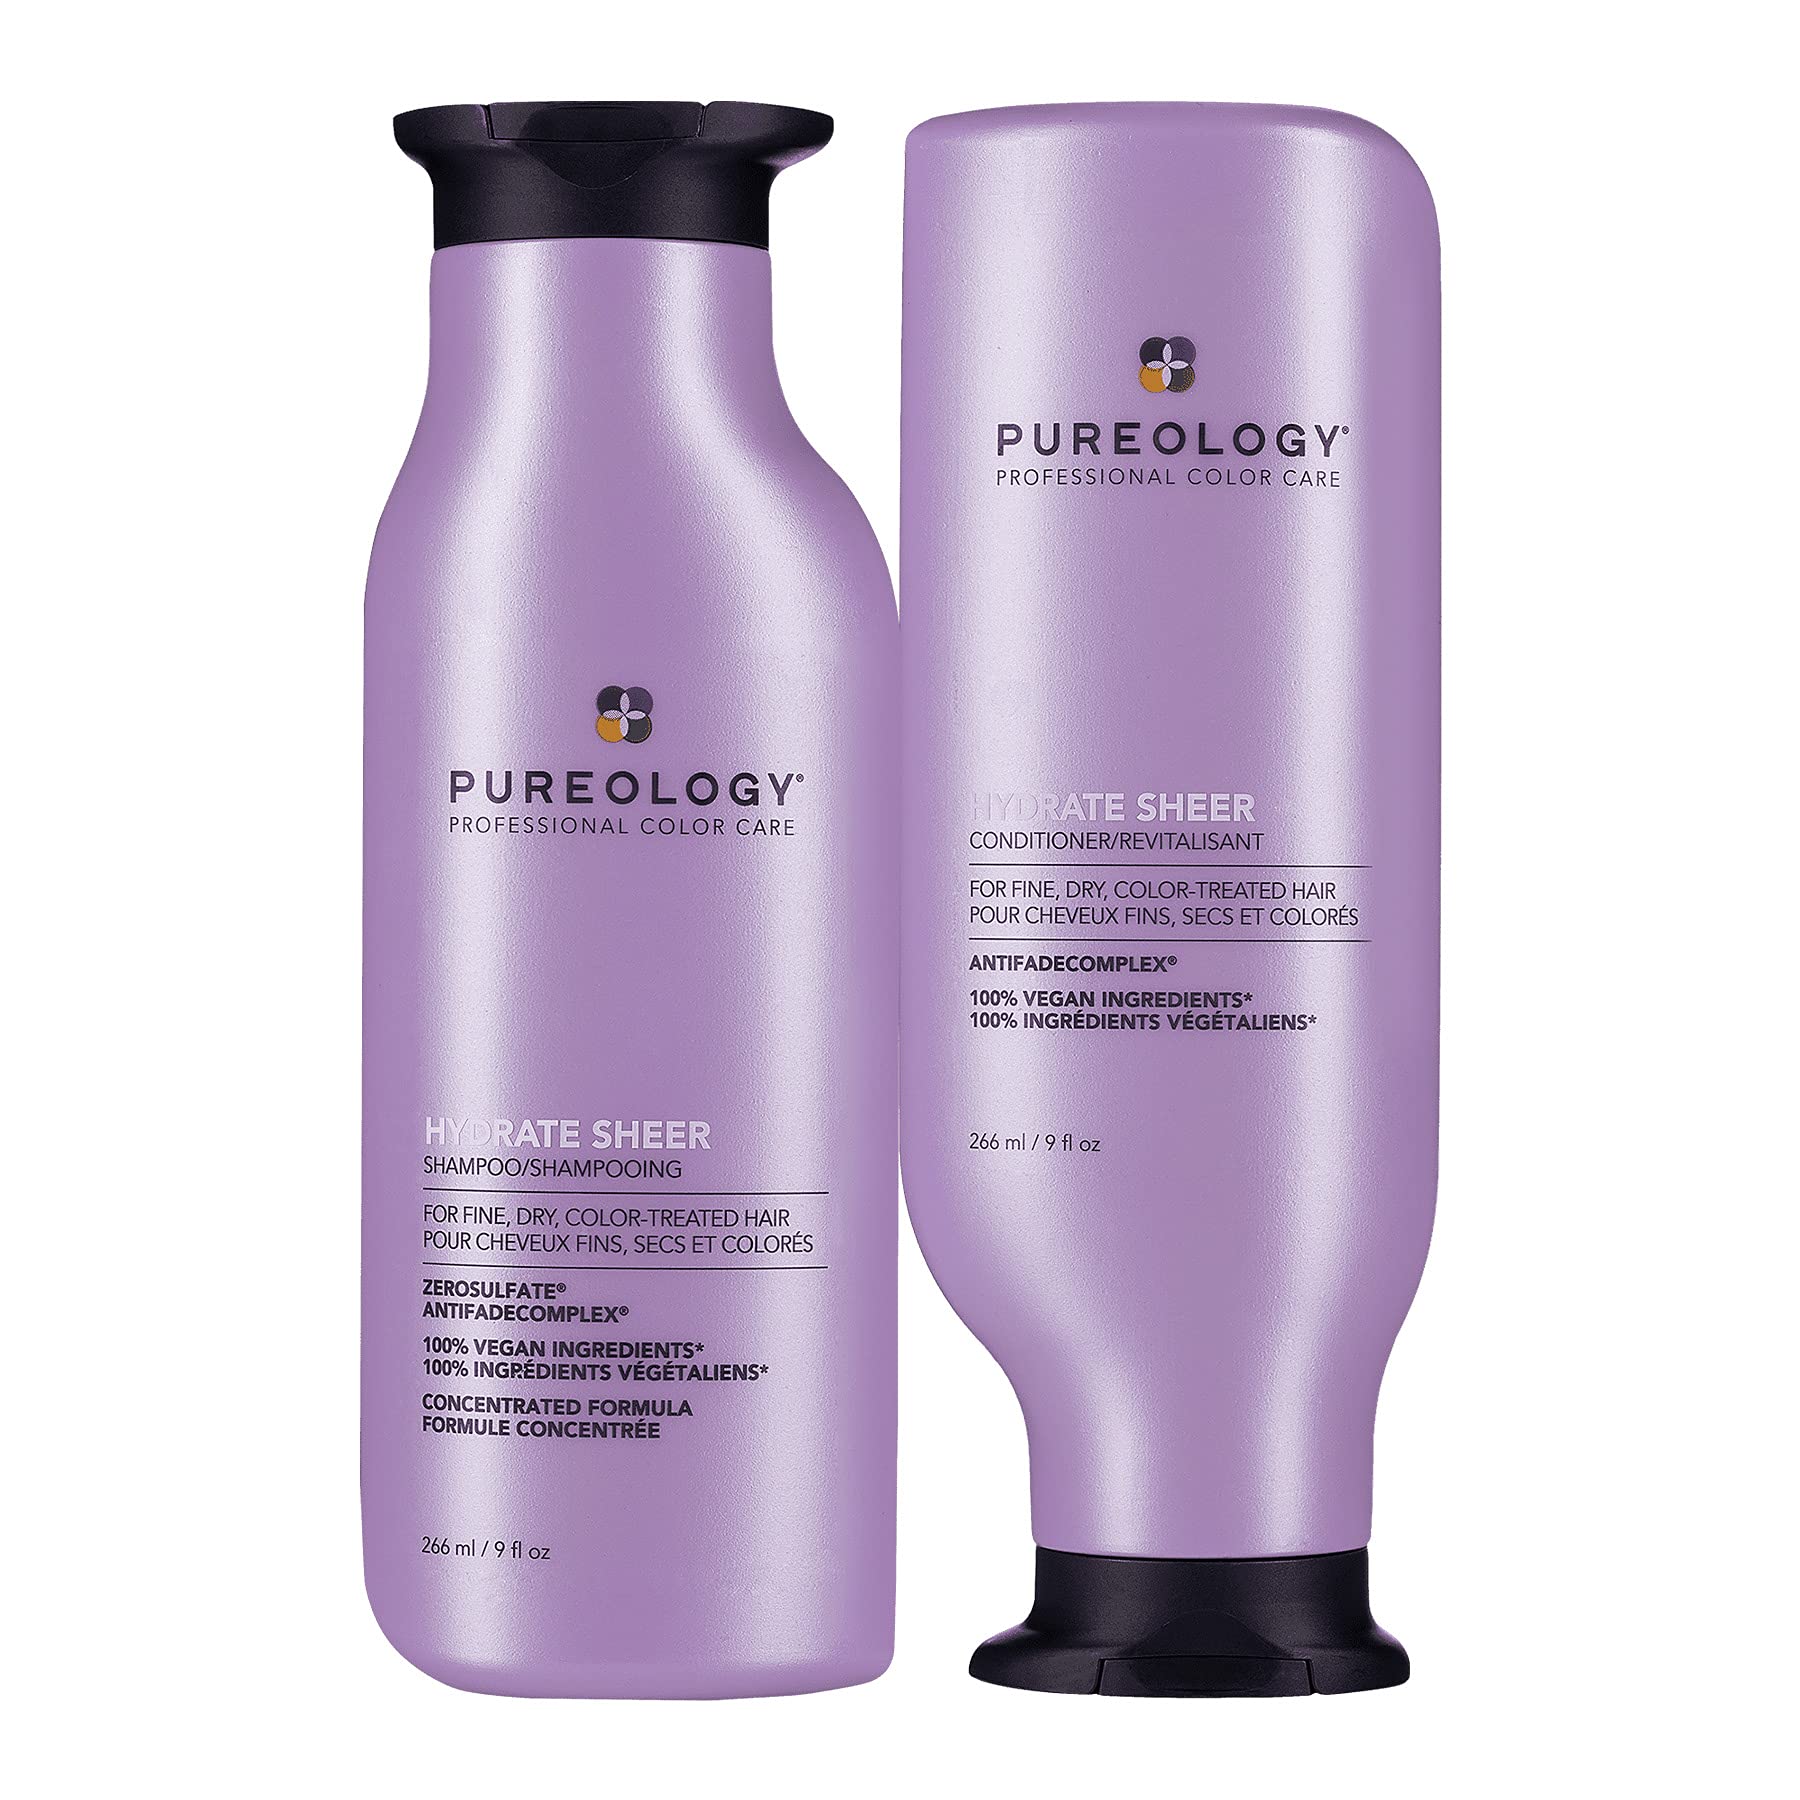 Pureology Hydrate Sheer Shampoo and Conditioner for Fine Hair | For Dry Color Treated Hair | Sulfate-Free | Vegan | Paraben-Free